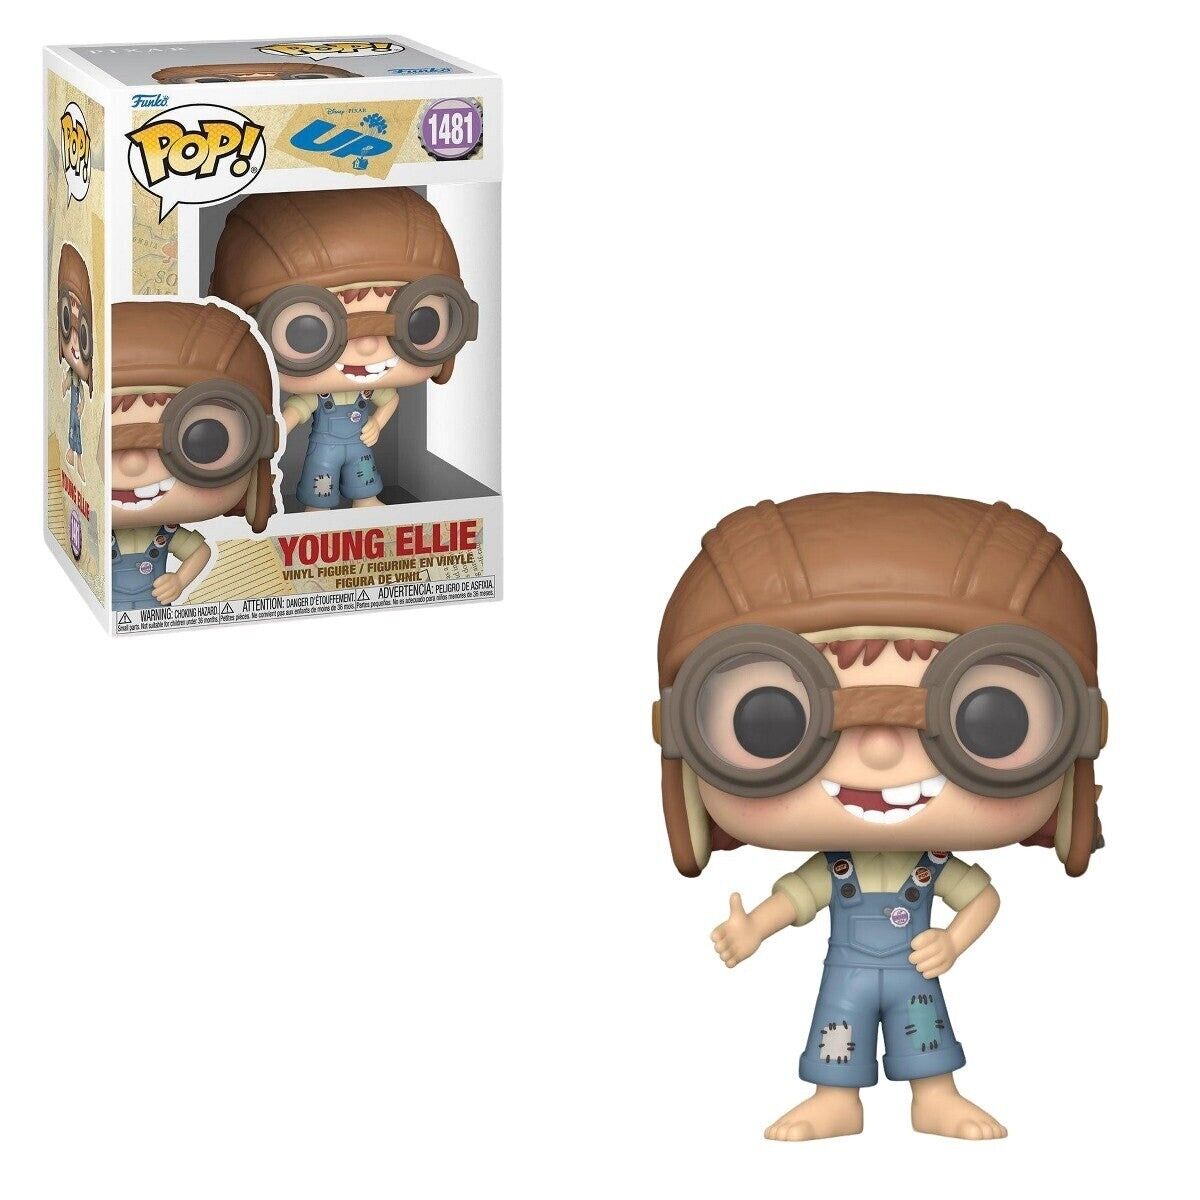 Funko Pop Up - Young Ellie #1481